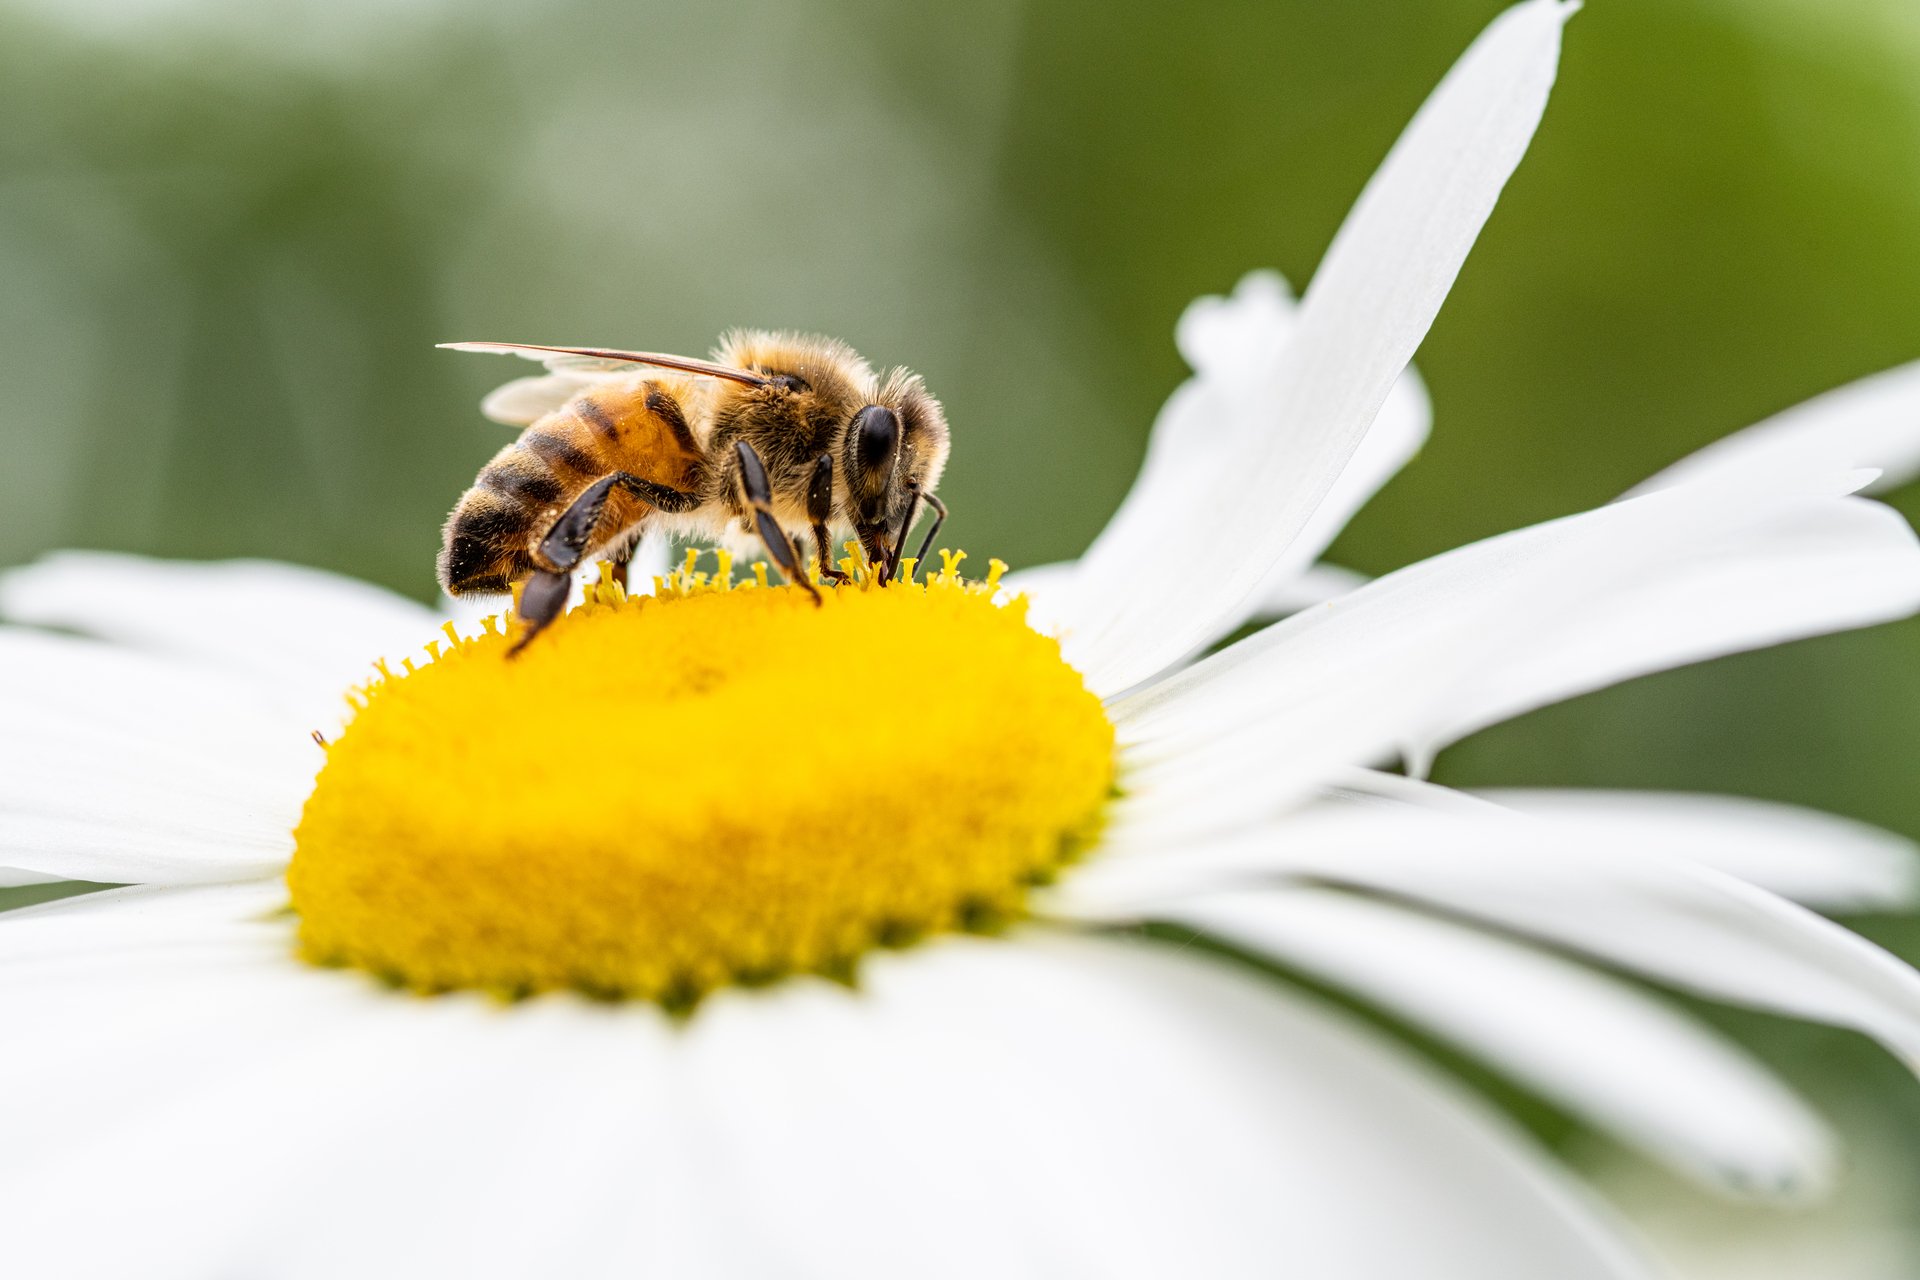 European honeybee on a white and yellow flower